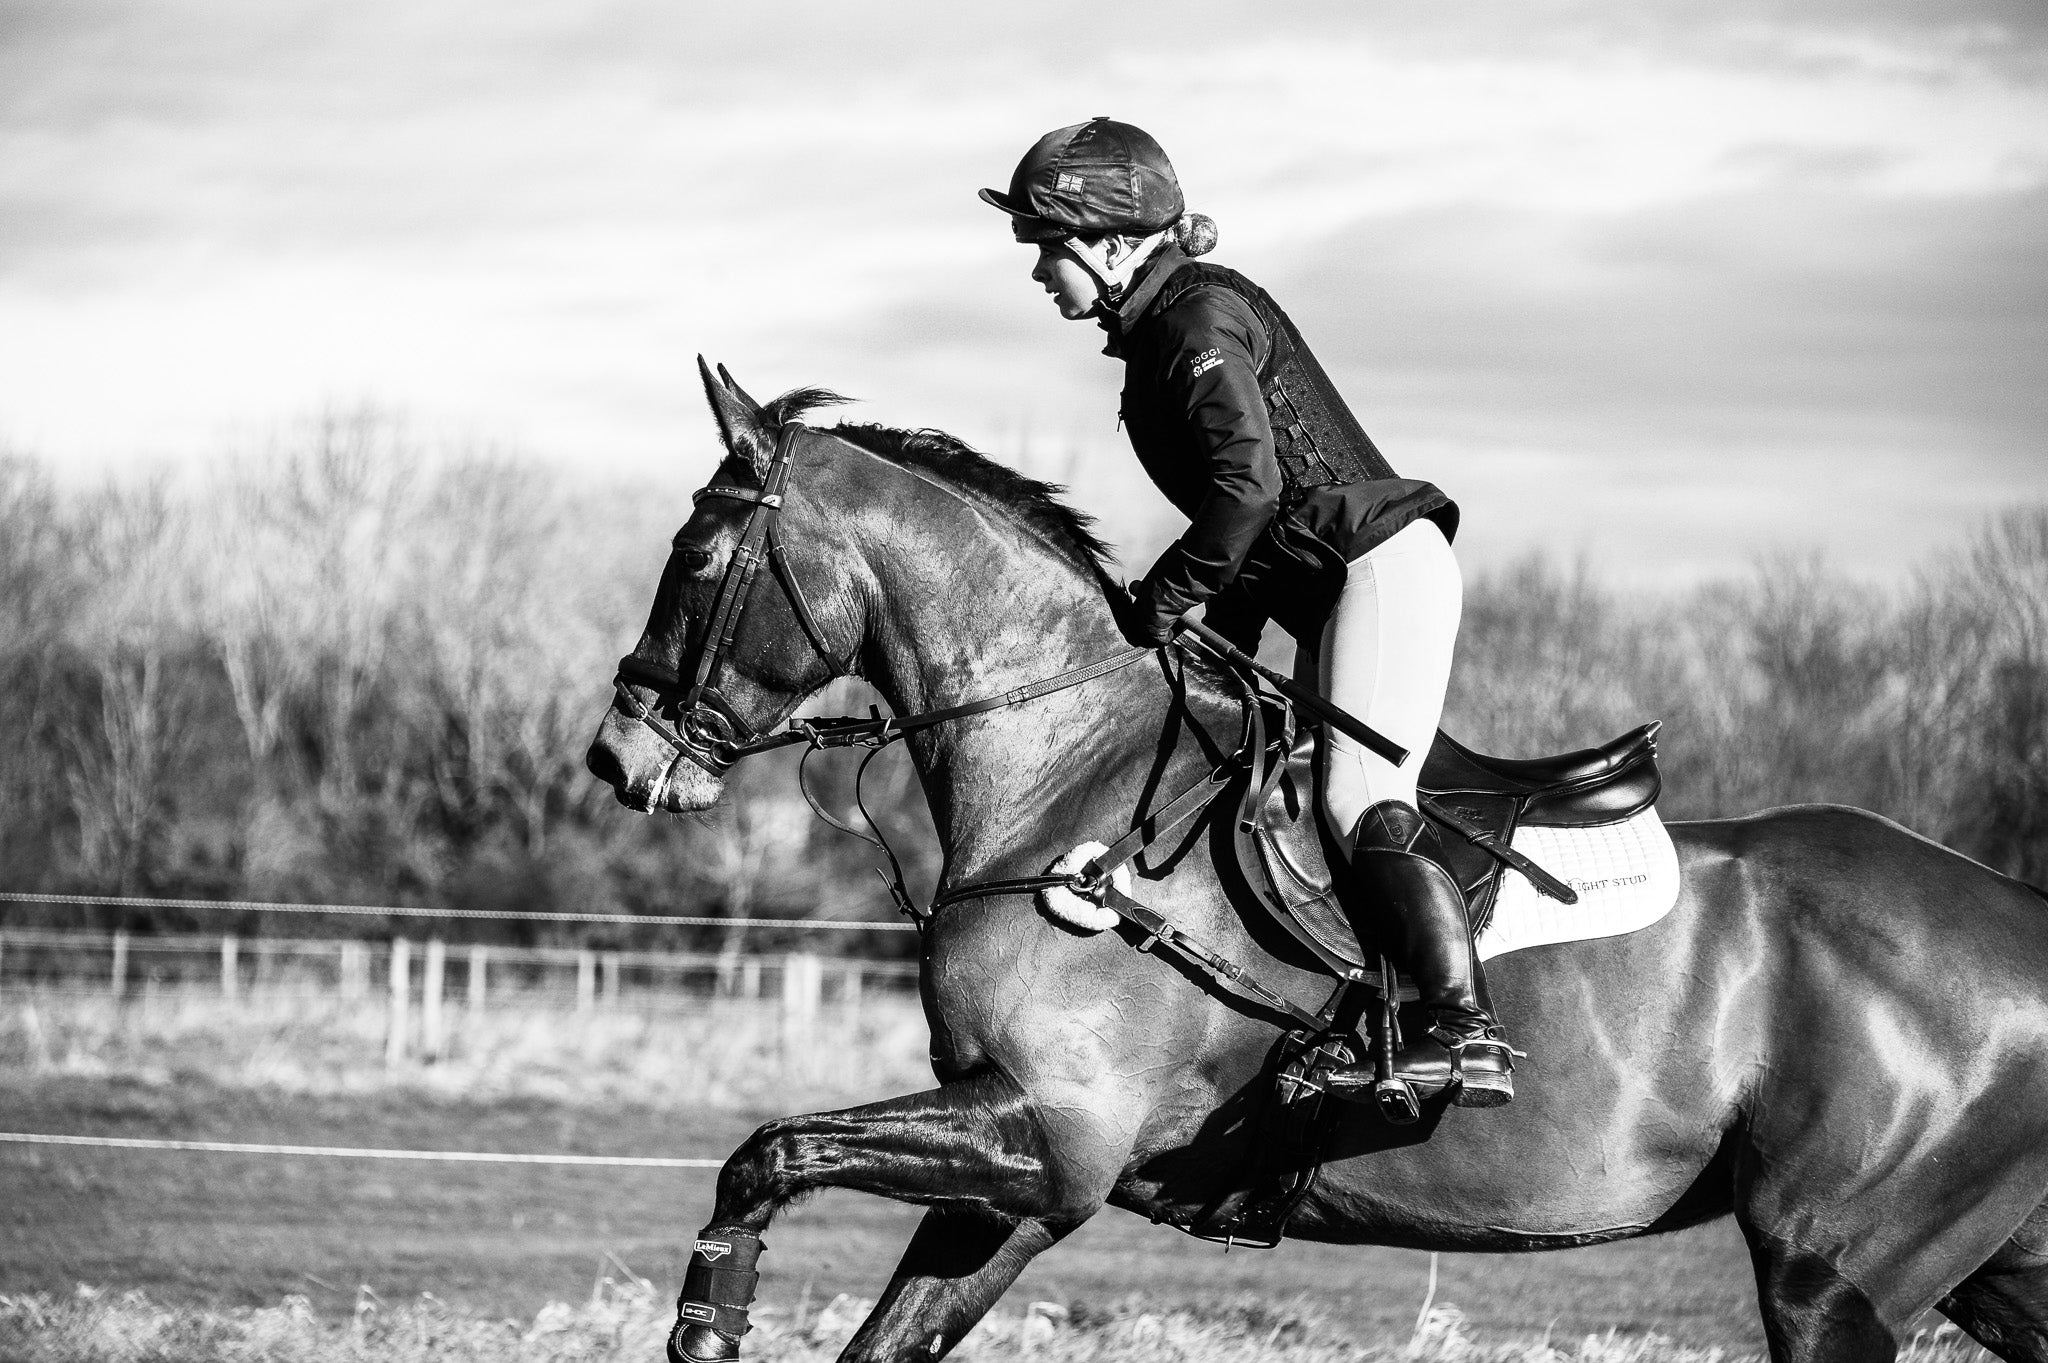 Equestrian out in the field - Horse rider and horse cantering during cross country.